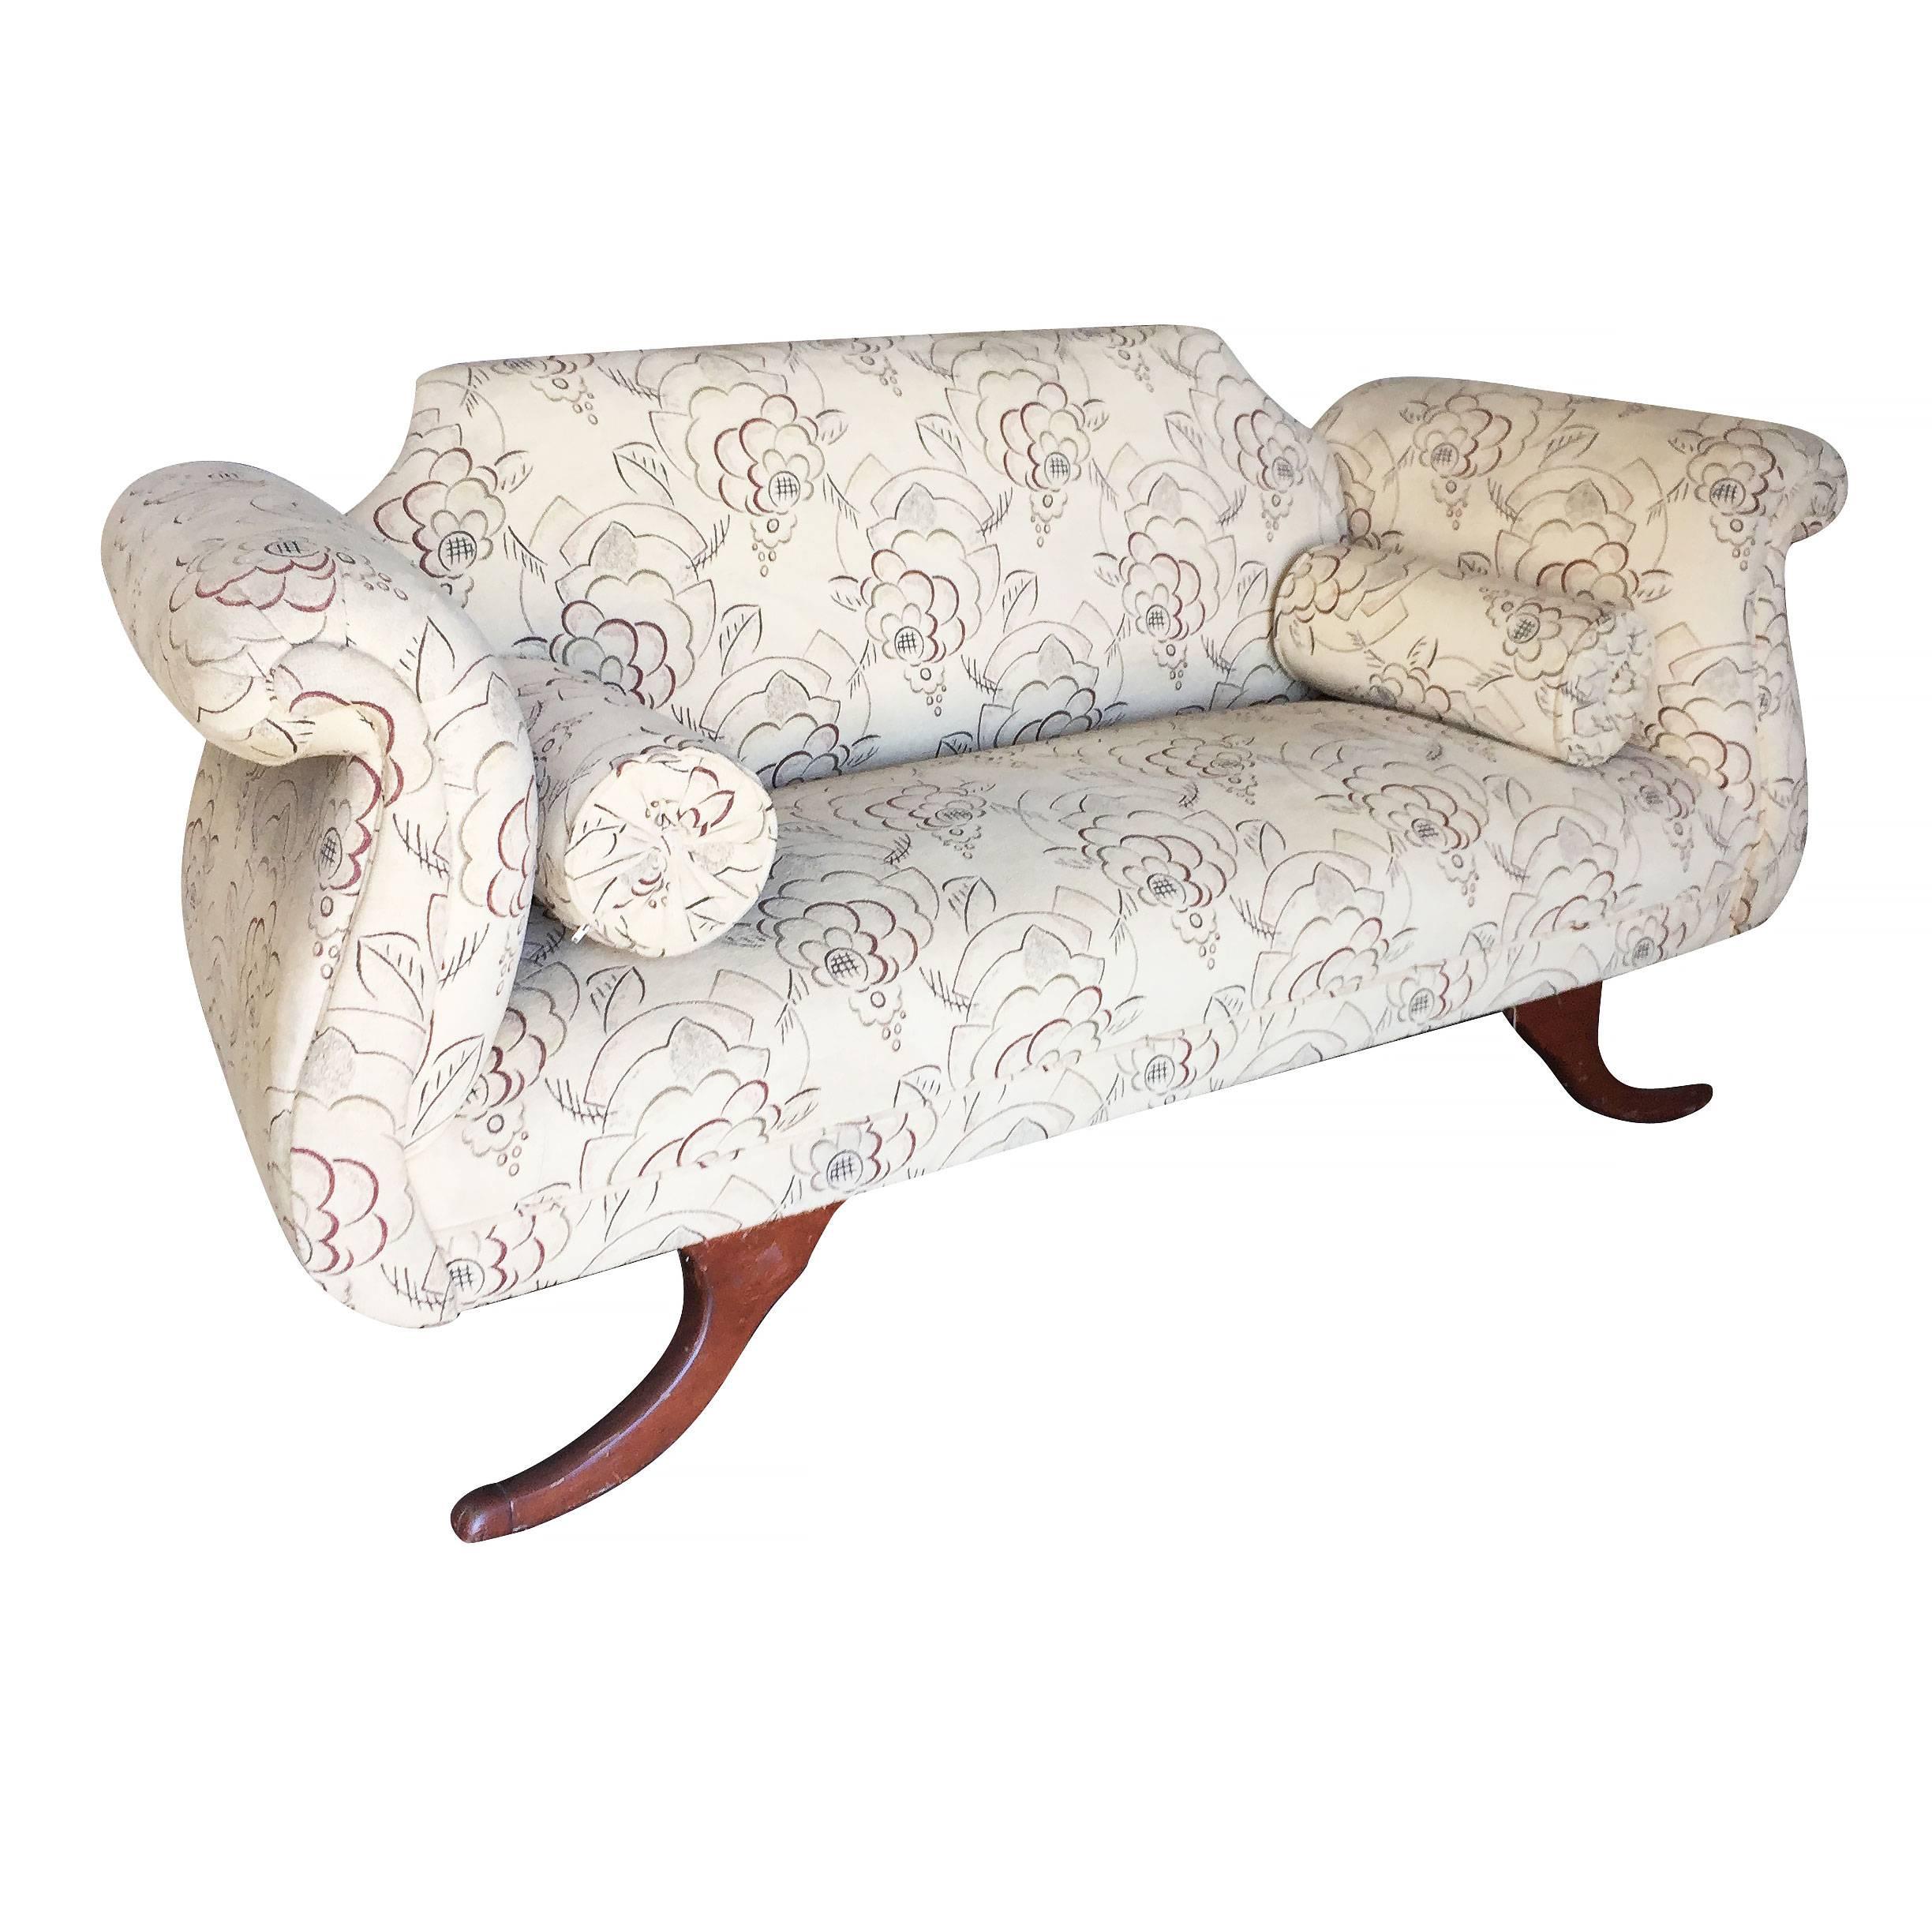 Duncan Phyfe Style Love Seat Settee with Scrolling Arms